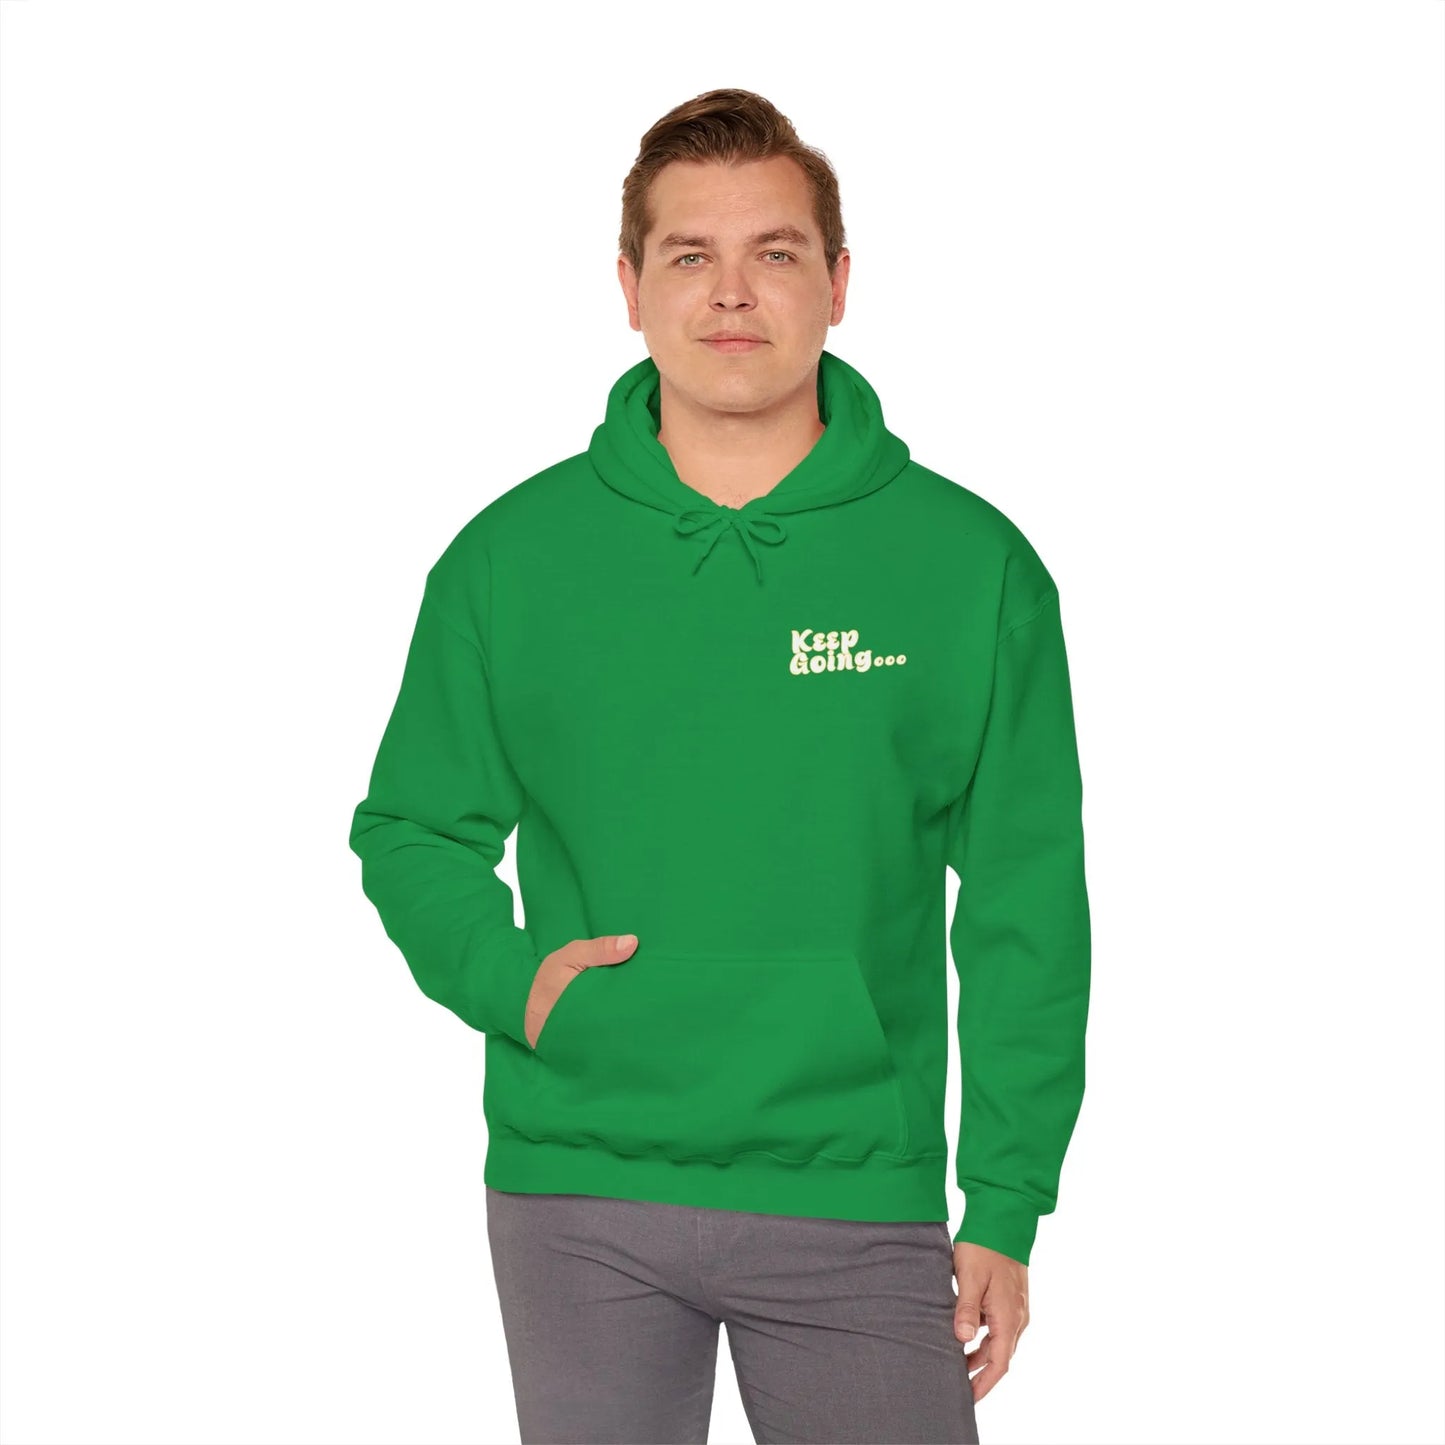 It's A Good Day To Keep Going Hoodie Yellow Green Front Model